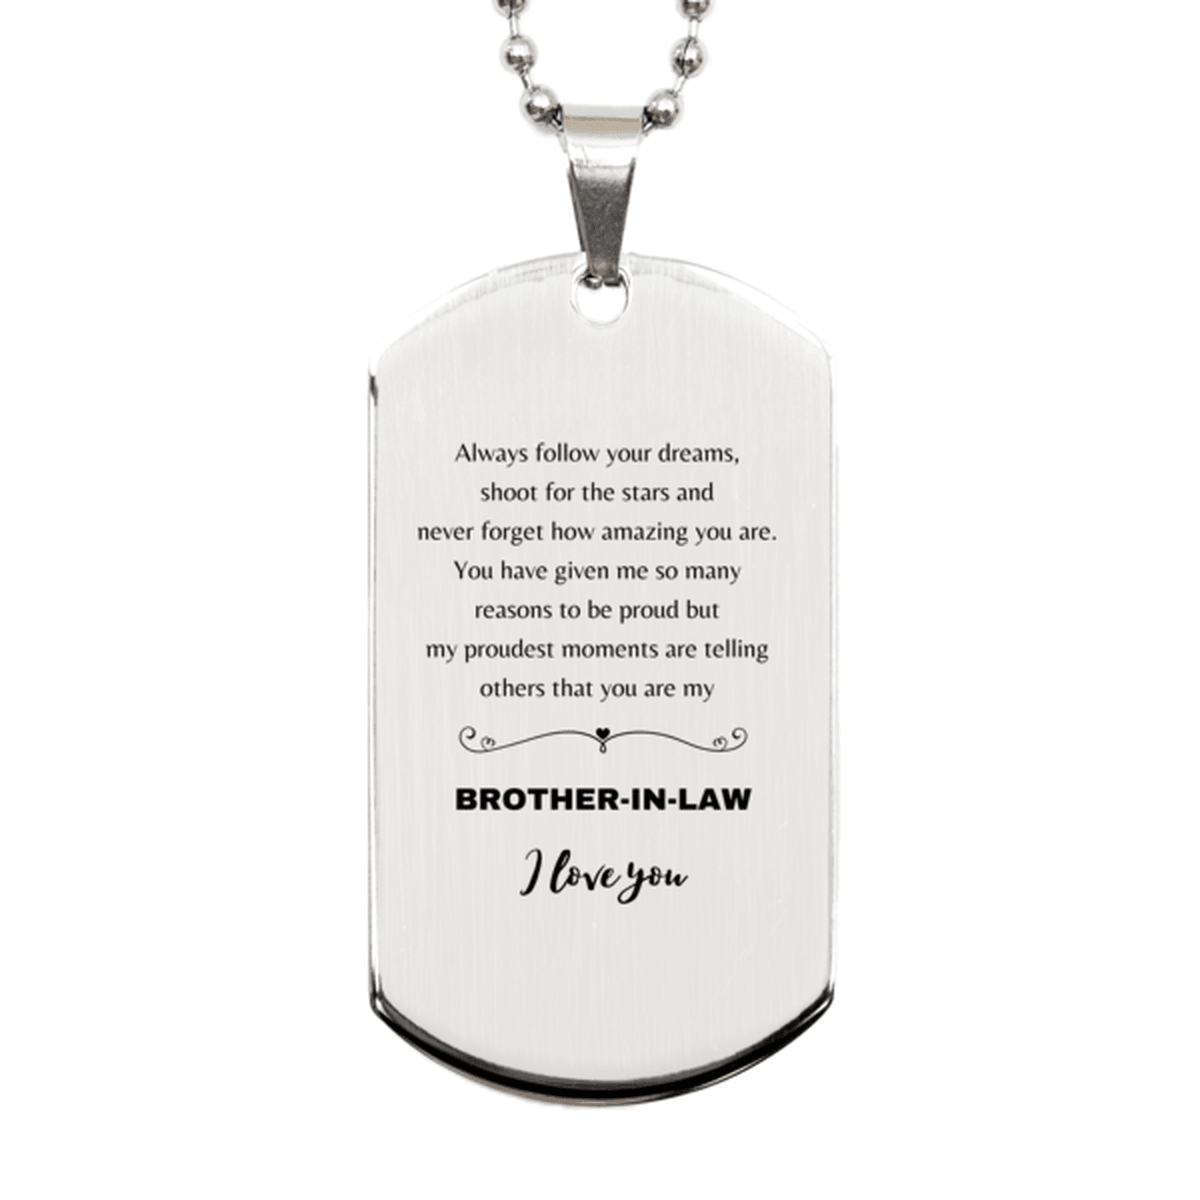 Brother-In-Law Silver Dog Tag Engraved Necklace - Always Follow your Dreams - Birthday, Christmas Holiday Jewelry Gift - Mallard Moon Gift Shop